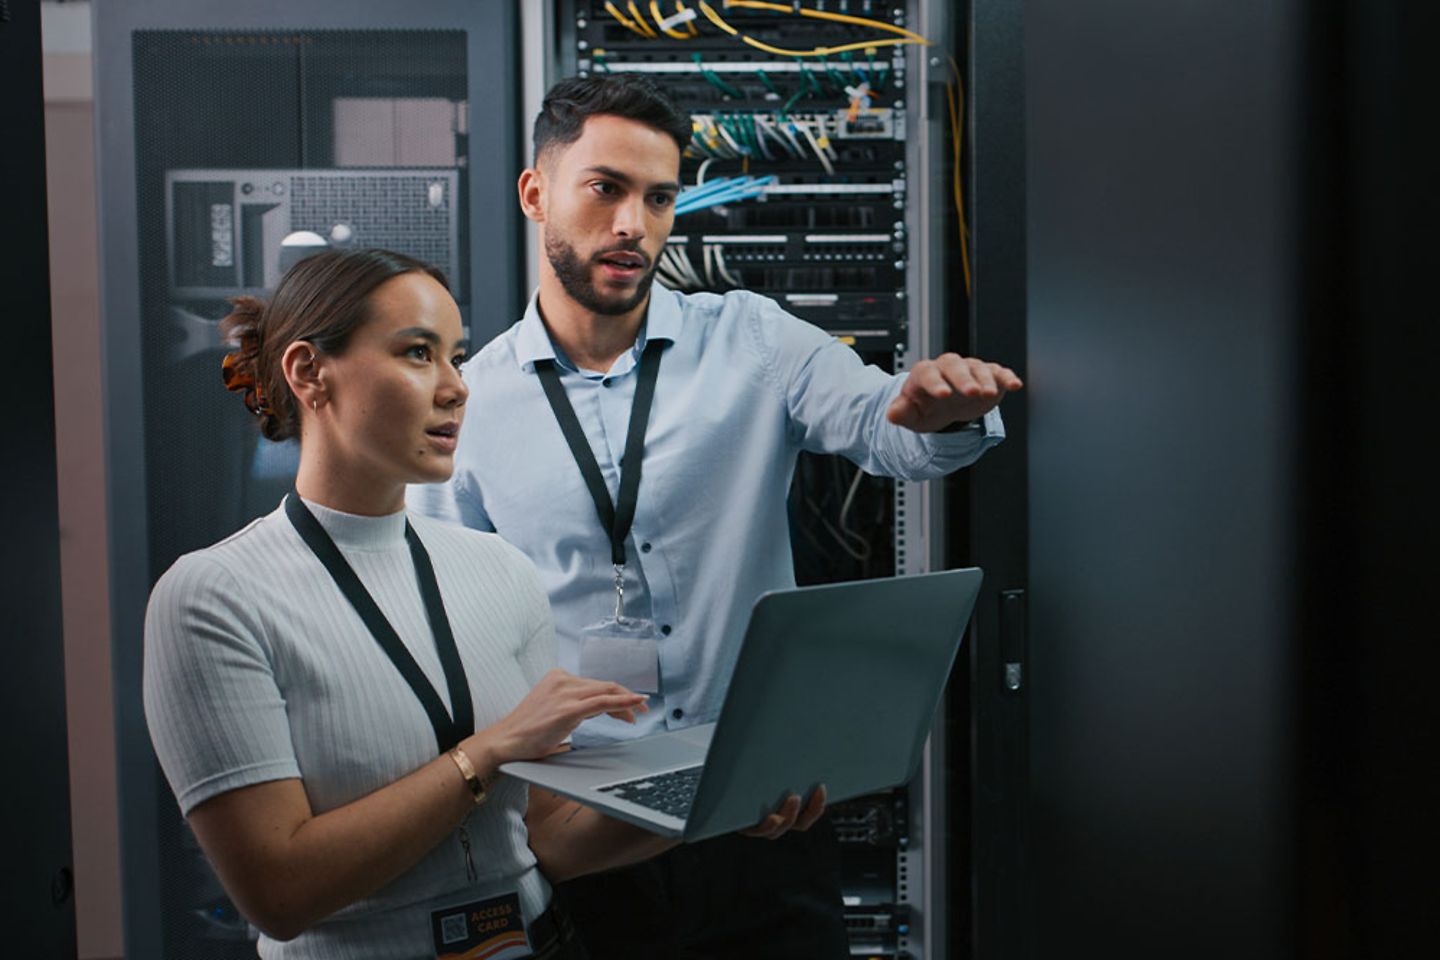 2 Colleagues standing in a Server Room.